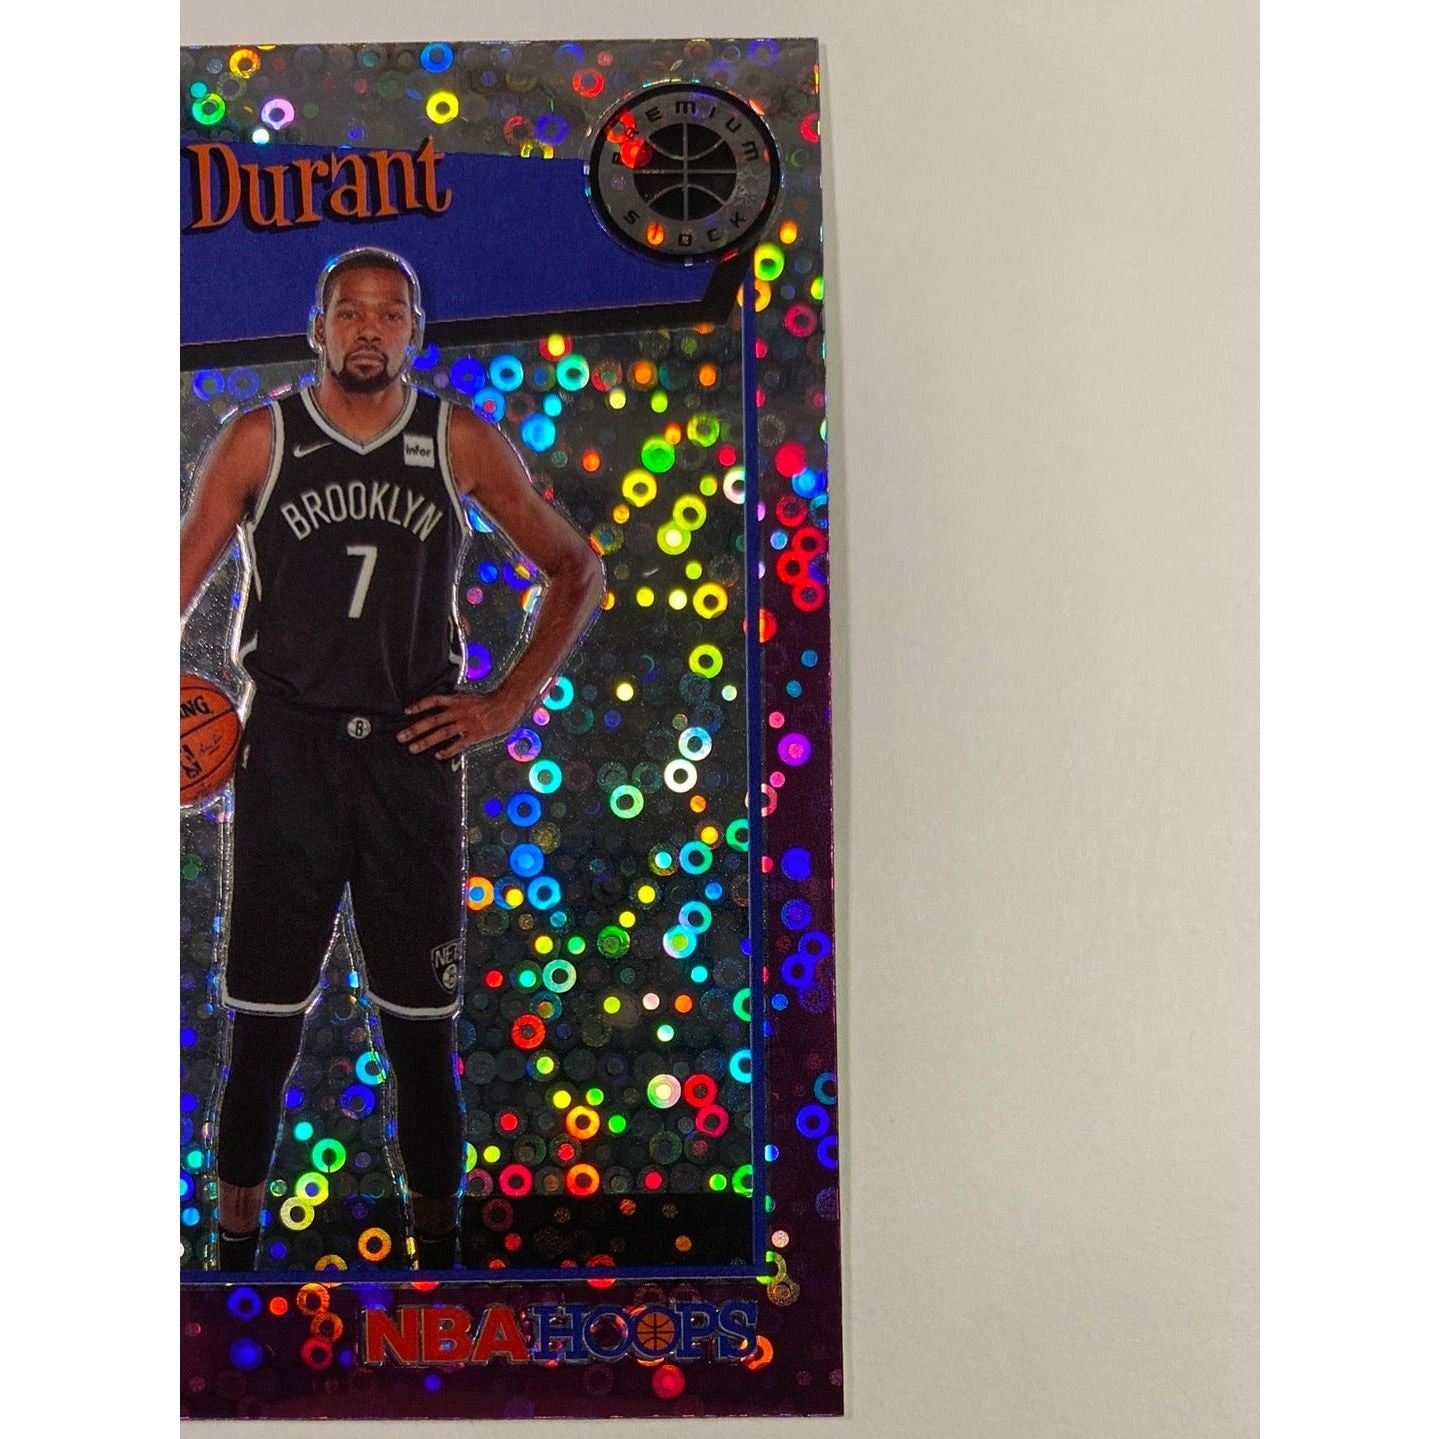  2019-20 Hoops Premium Stock Kevin Durant Purple Disco Prizm  Local Legends Cards & Collectibles